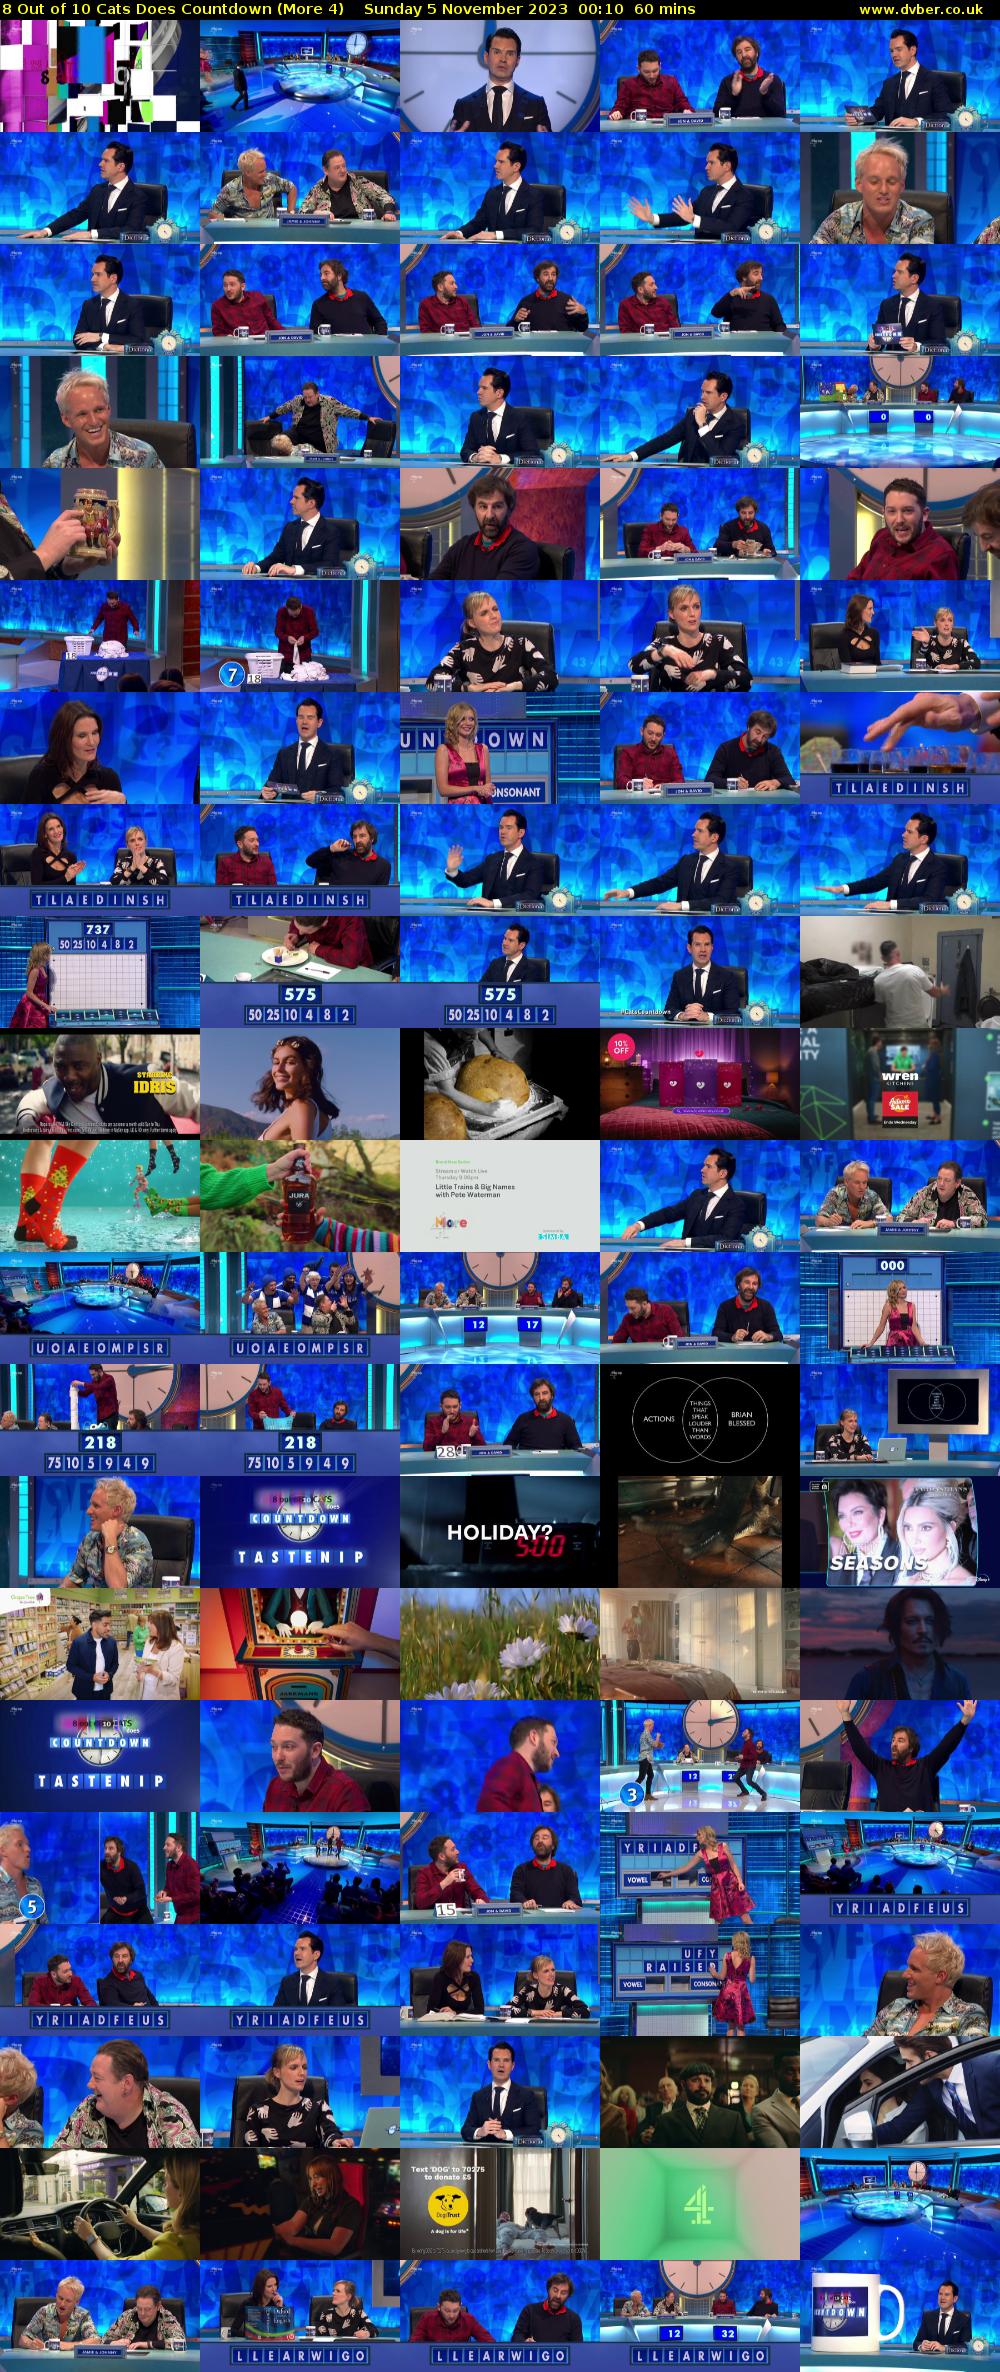 8 Out of 10 Cats Does Countdown (More 4) Sunday 5 November 2023 00:10 - 01:10